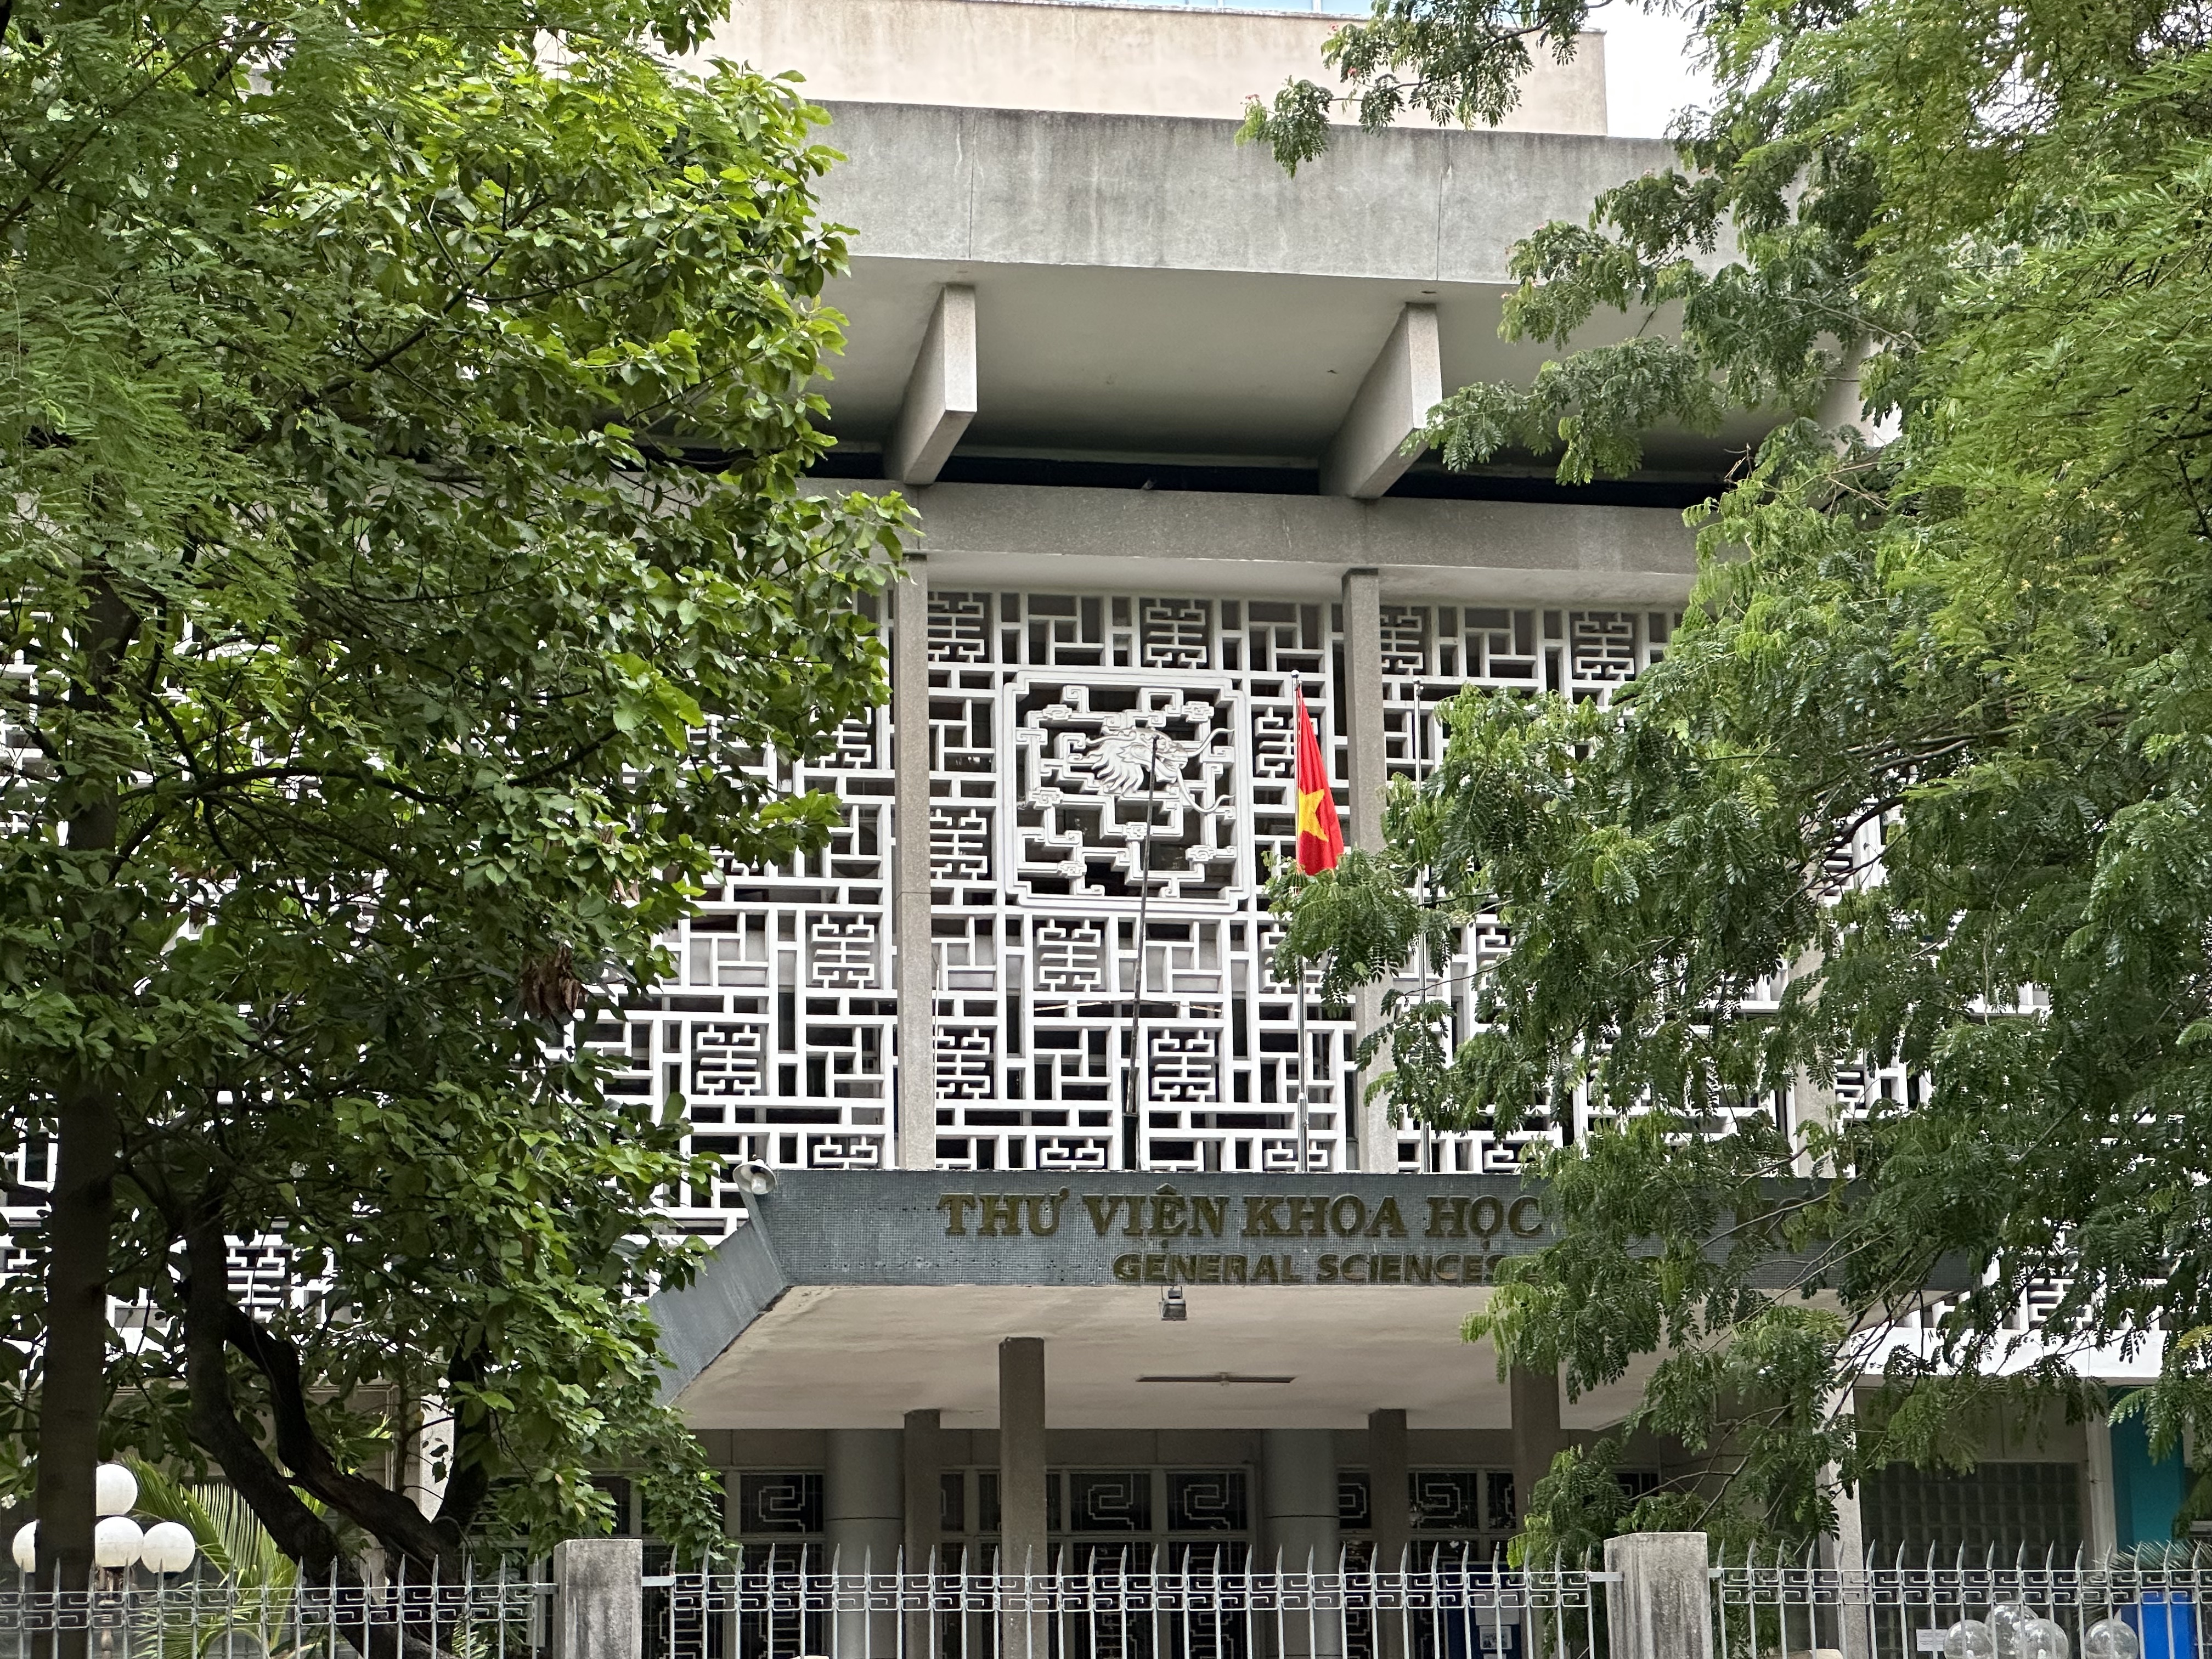 Example of Vietnamese Modernism: General Sciences Library of Ho Chi Minh City.